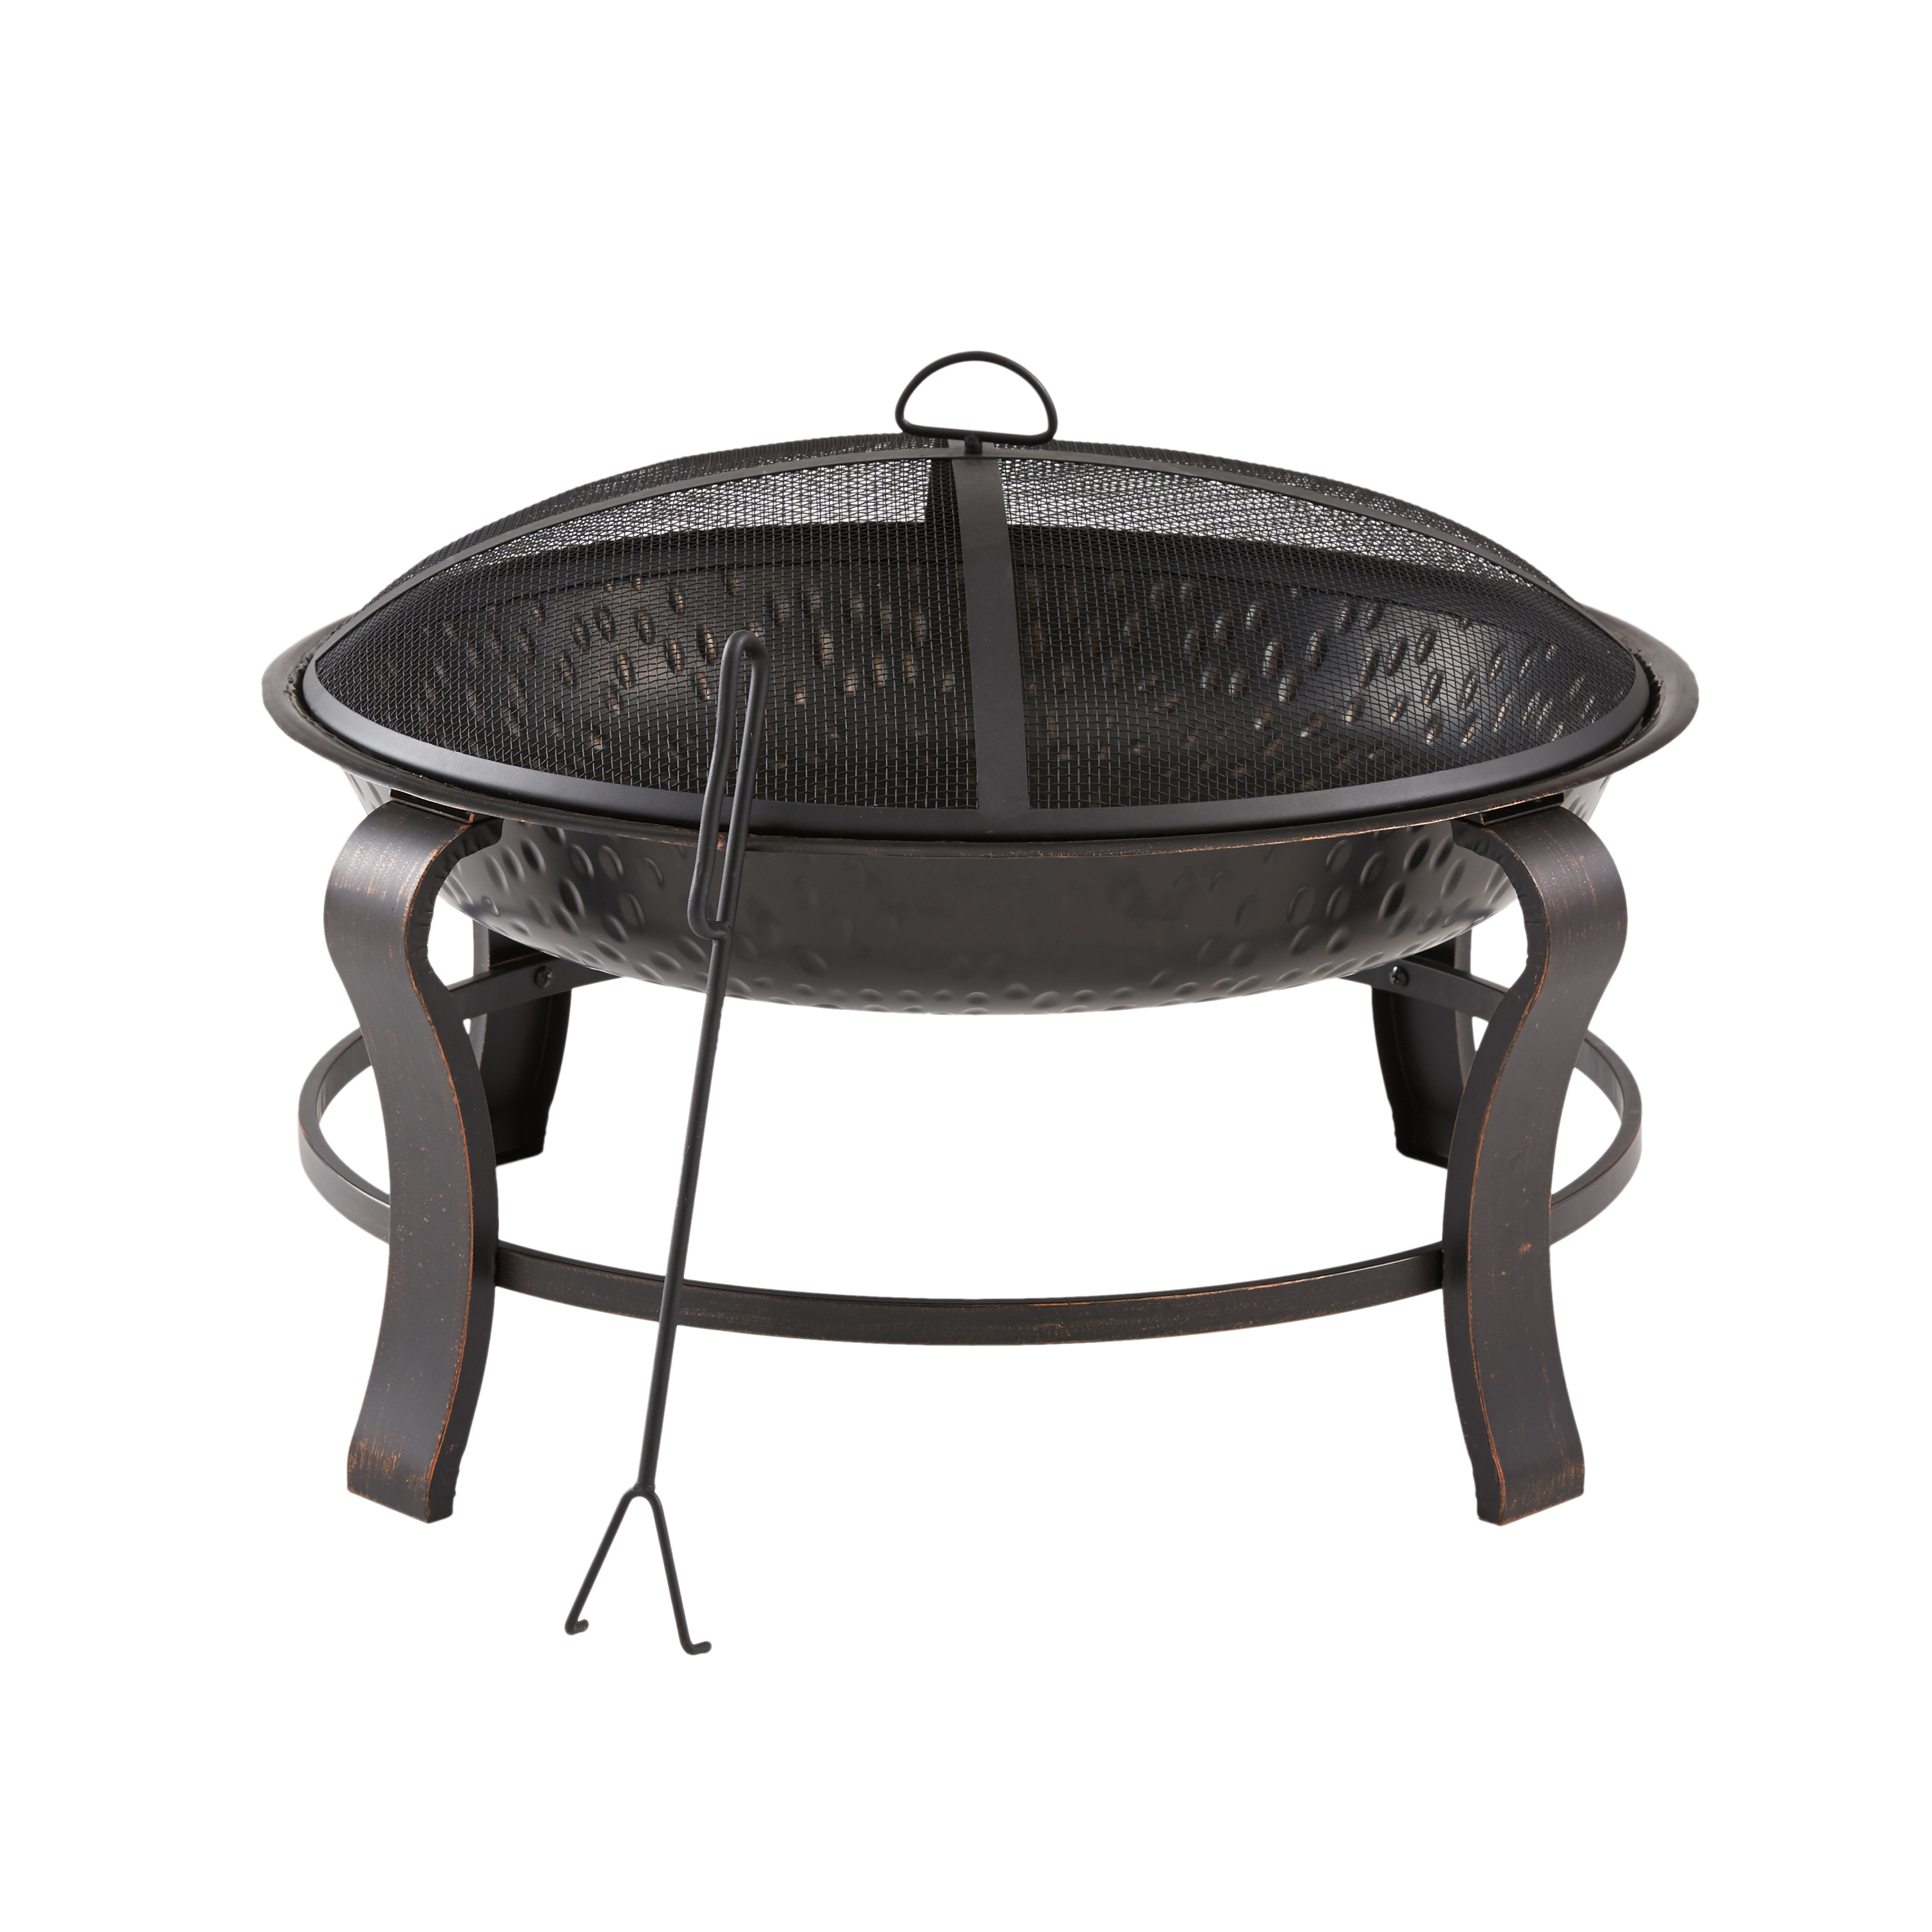 Mainstays Owen Park 28-Inch Round Wood Burning Fire Pit with Mesh Spark Guard - image 2 of 8